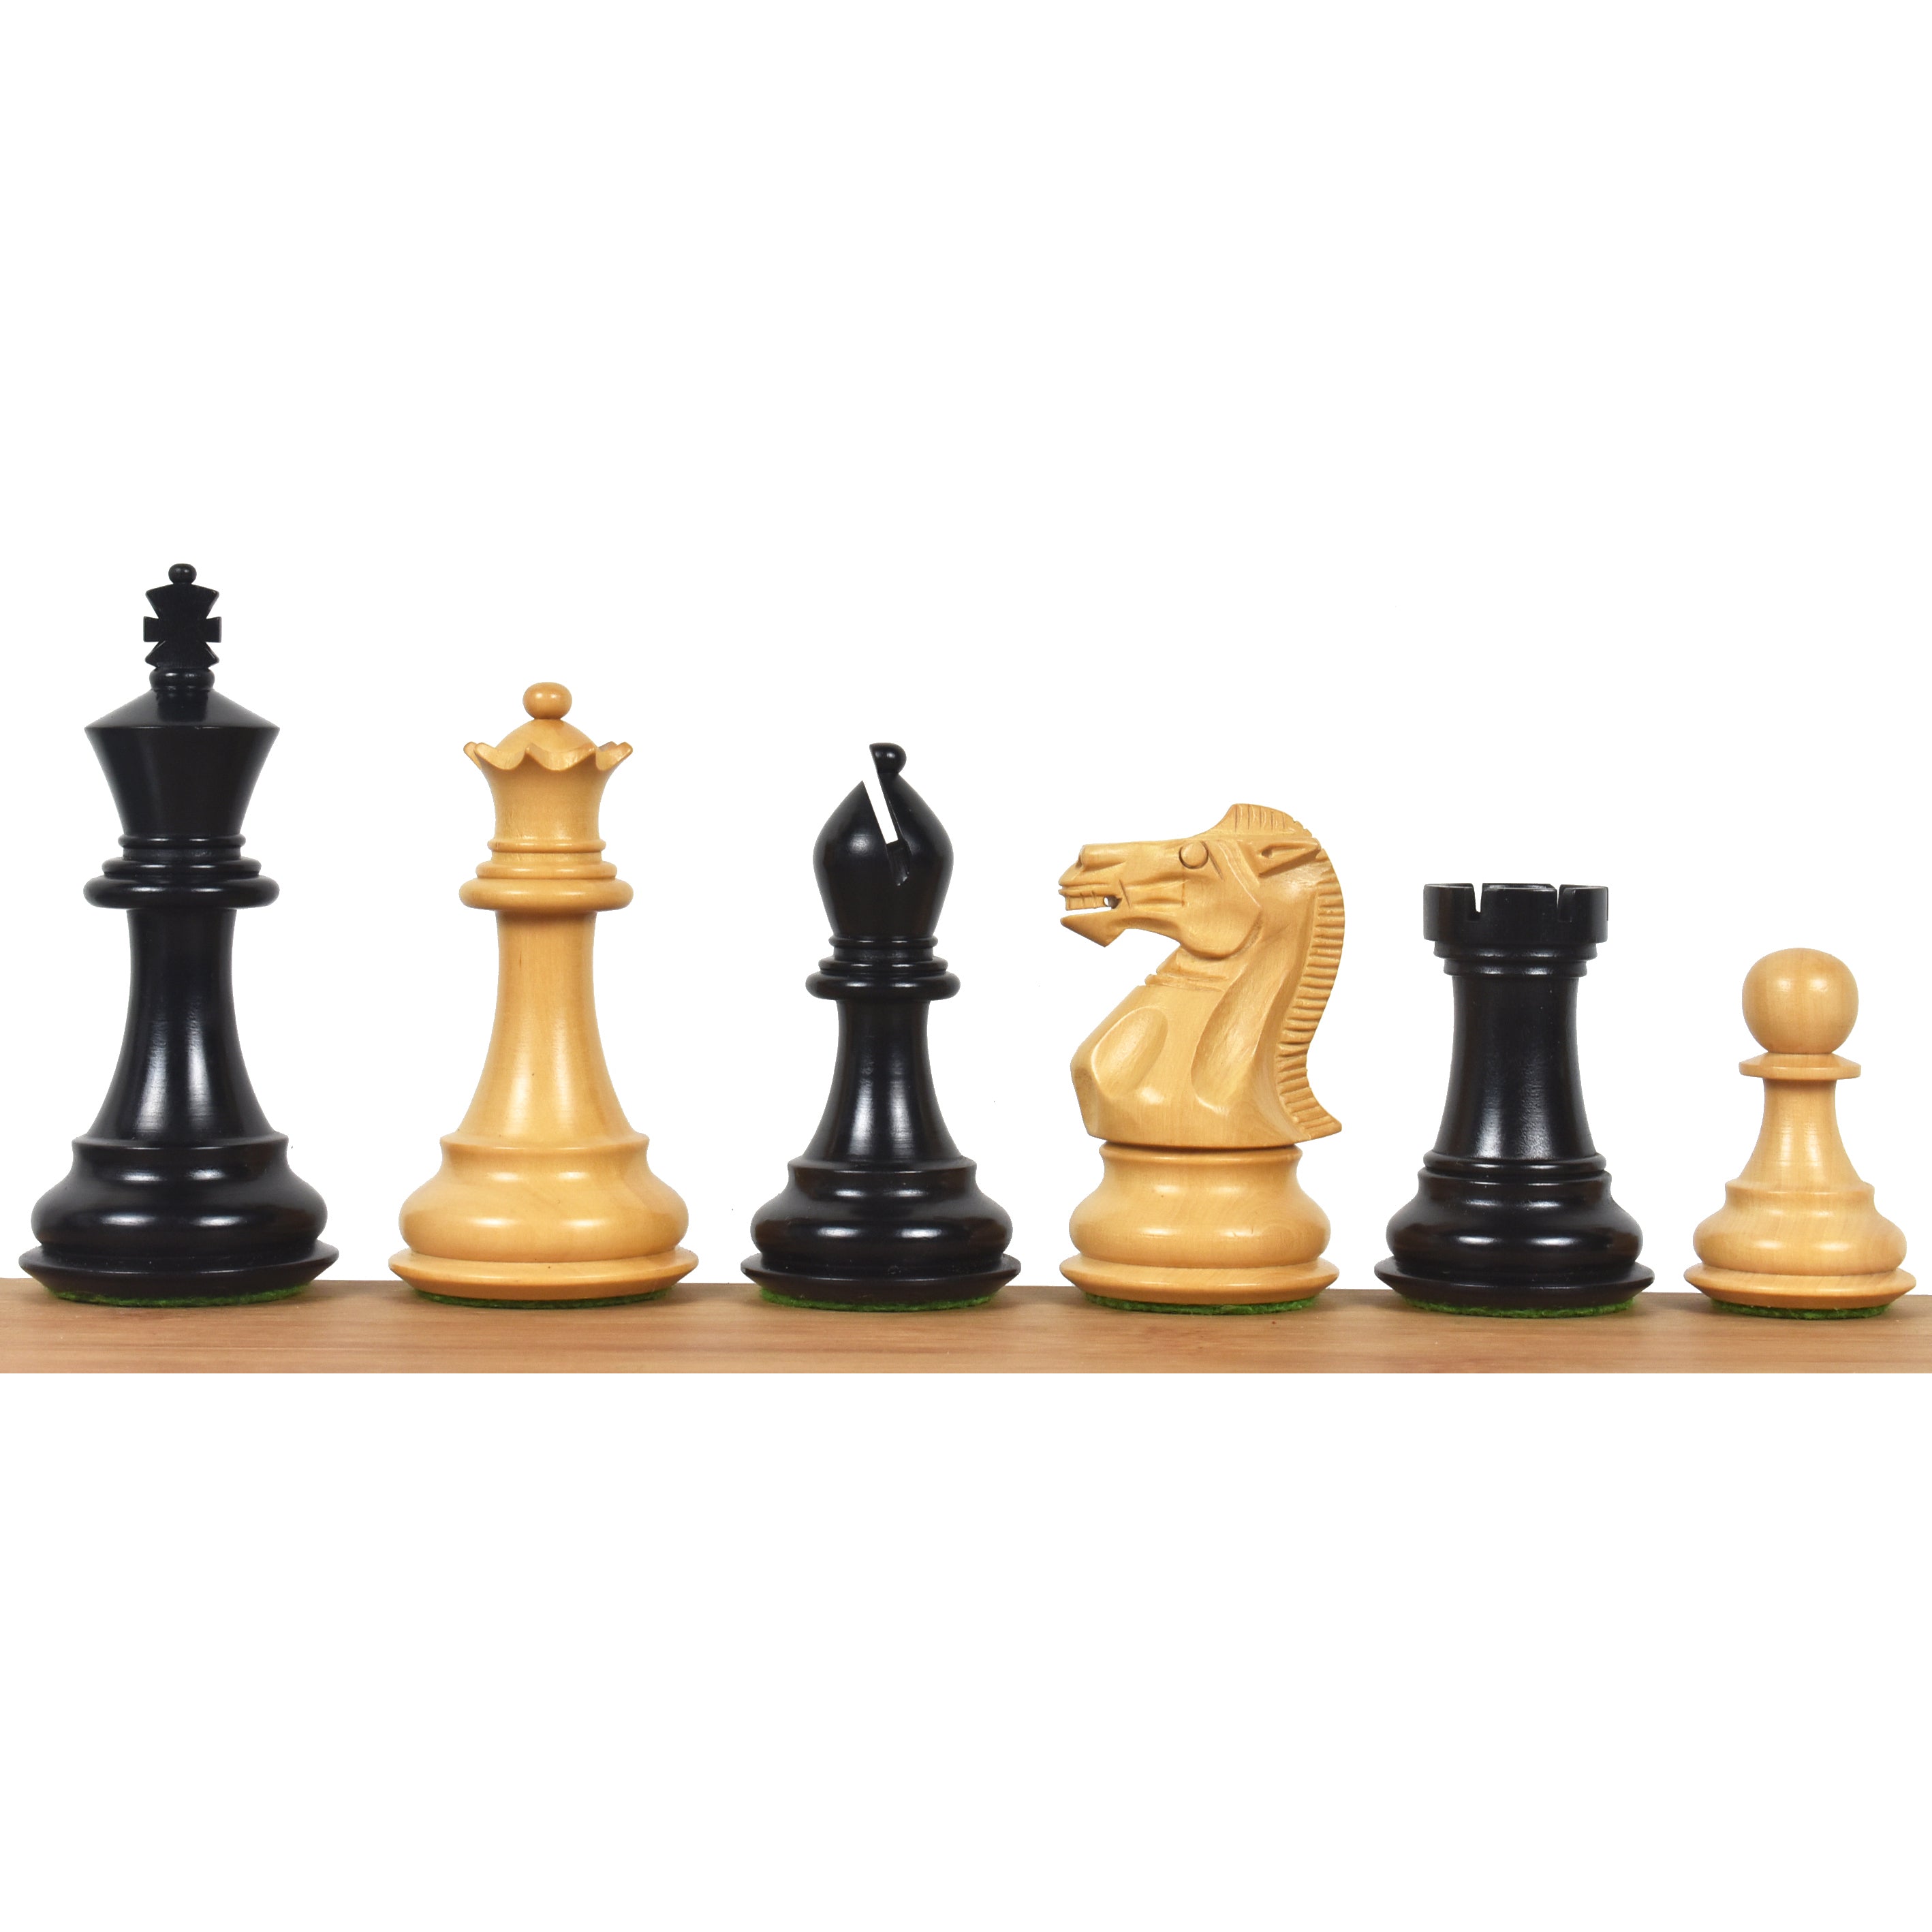 Wooden chess 3/1